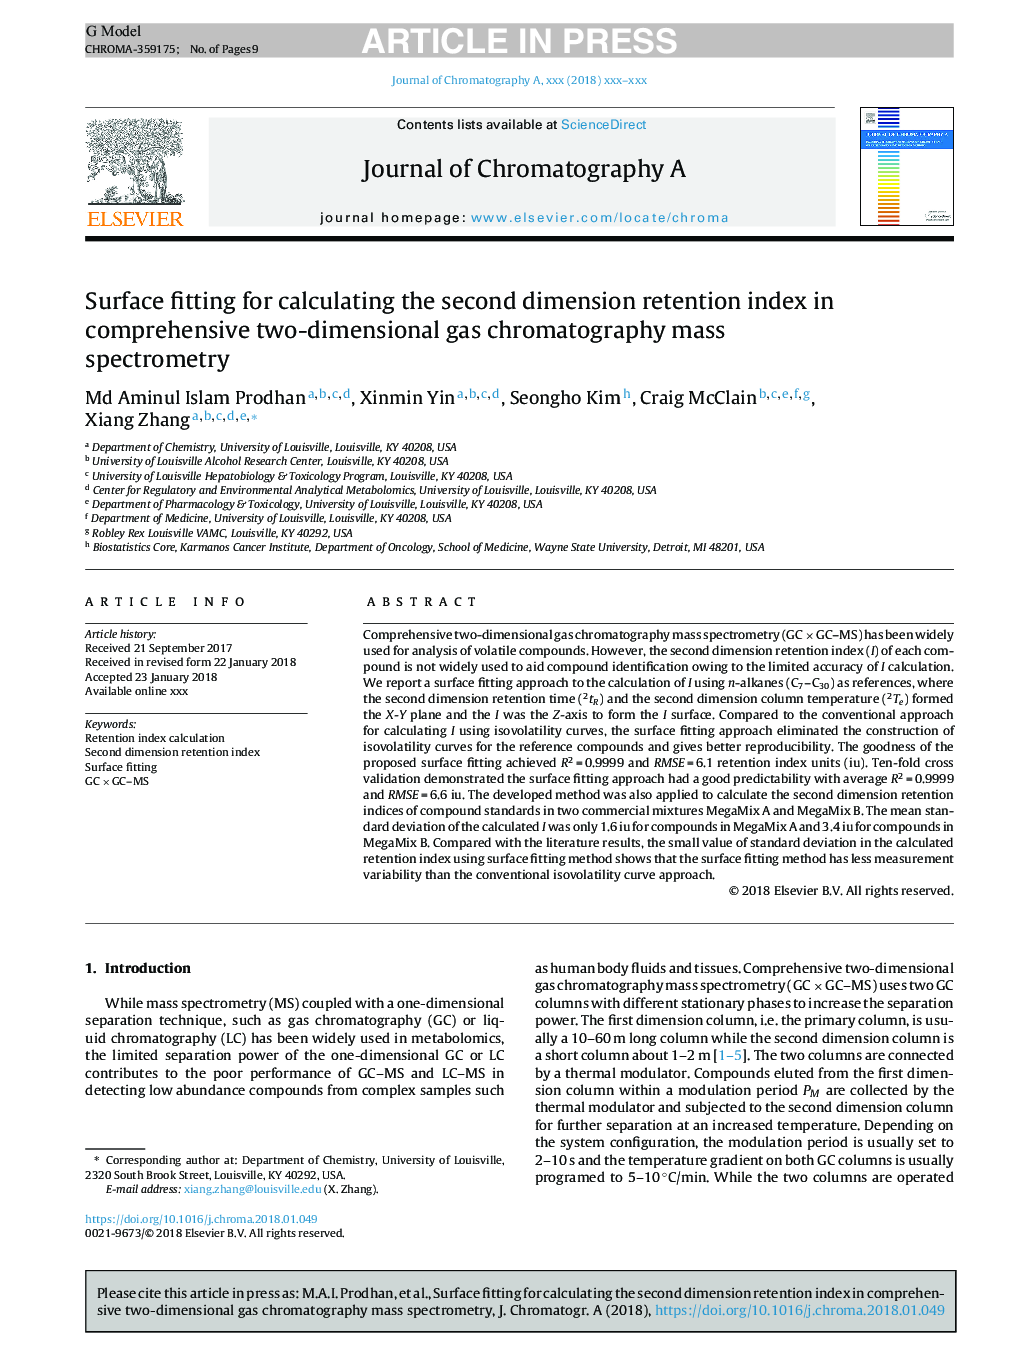 Surface fitting for calculating the second dimension retention index in comprehensive two-dimensional gas chromatography mass spectrometry